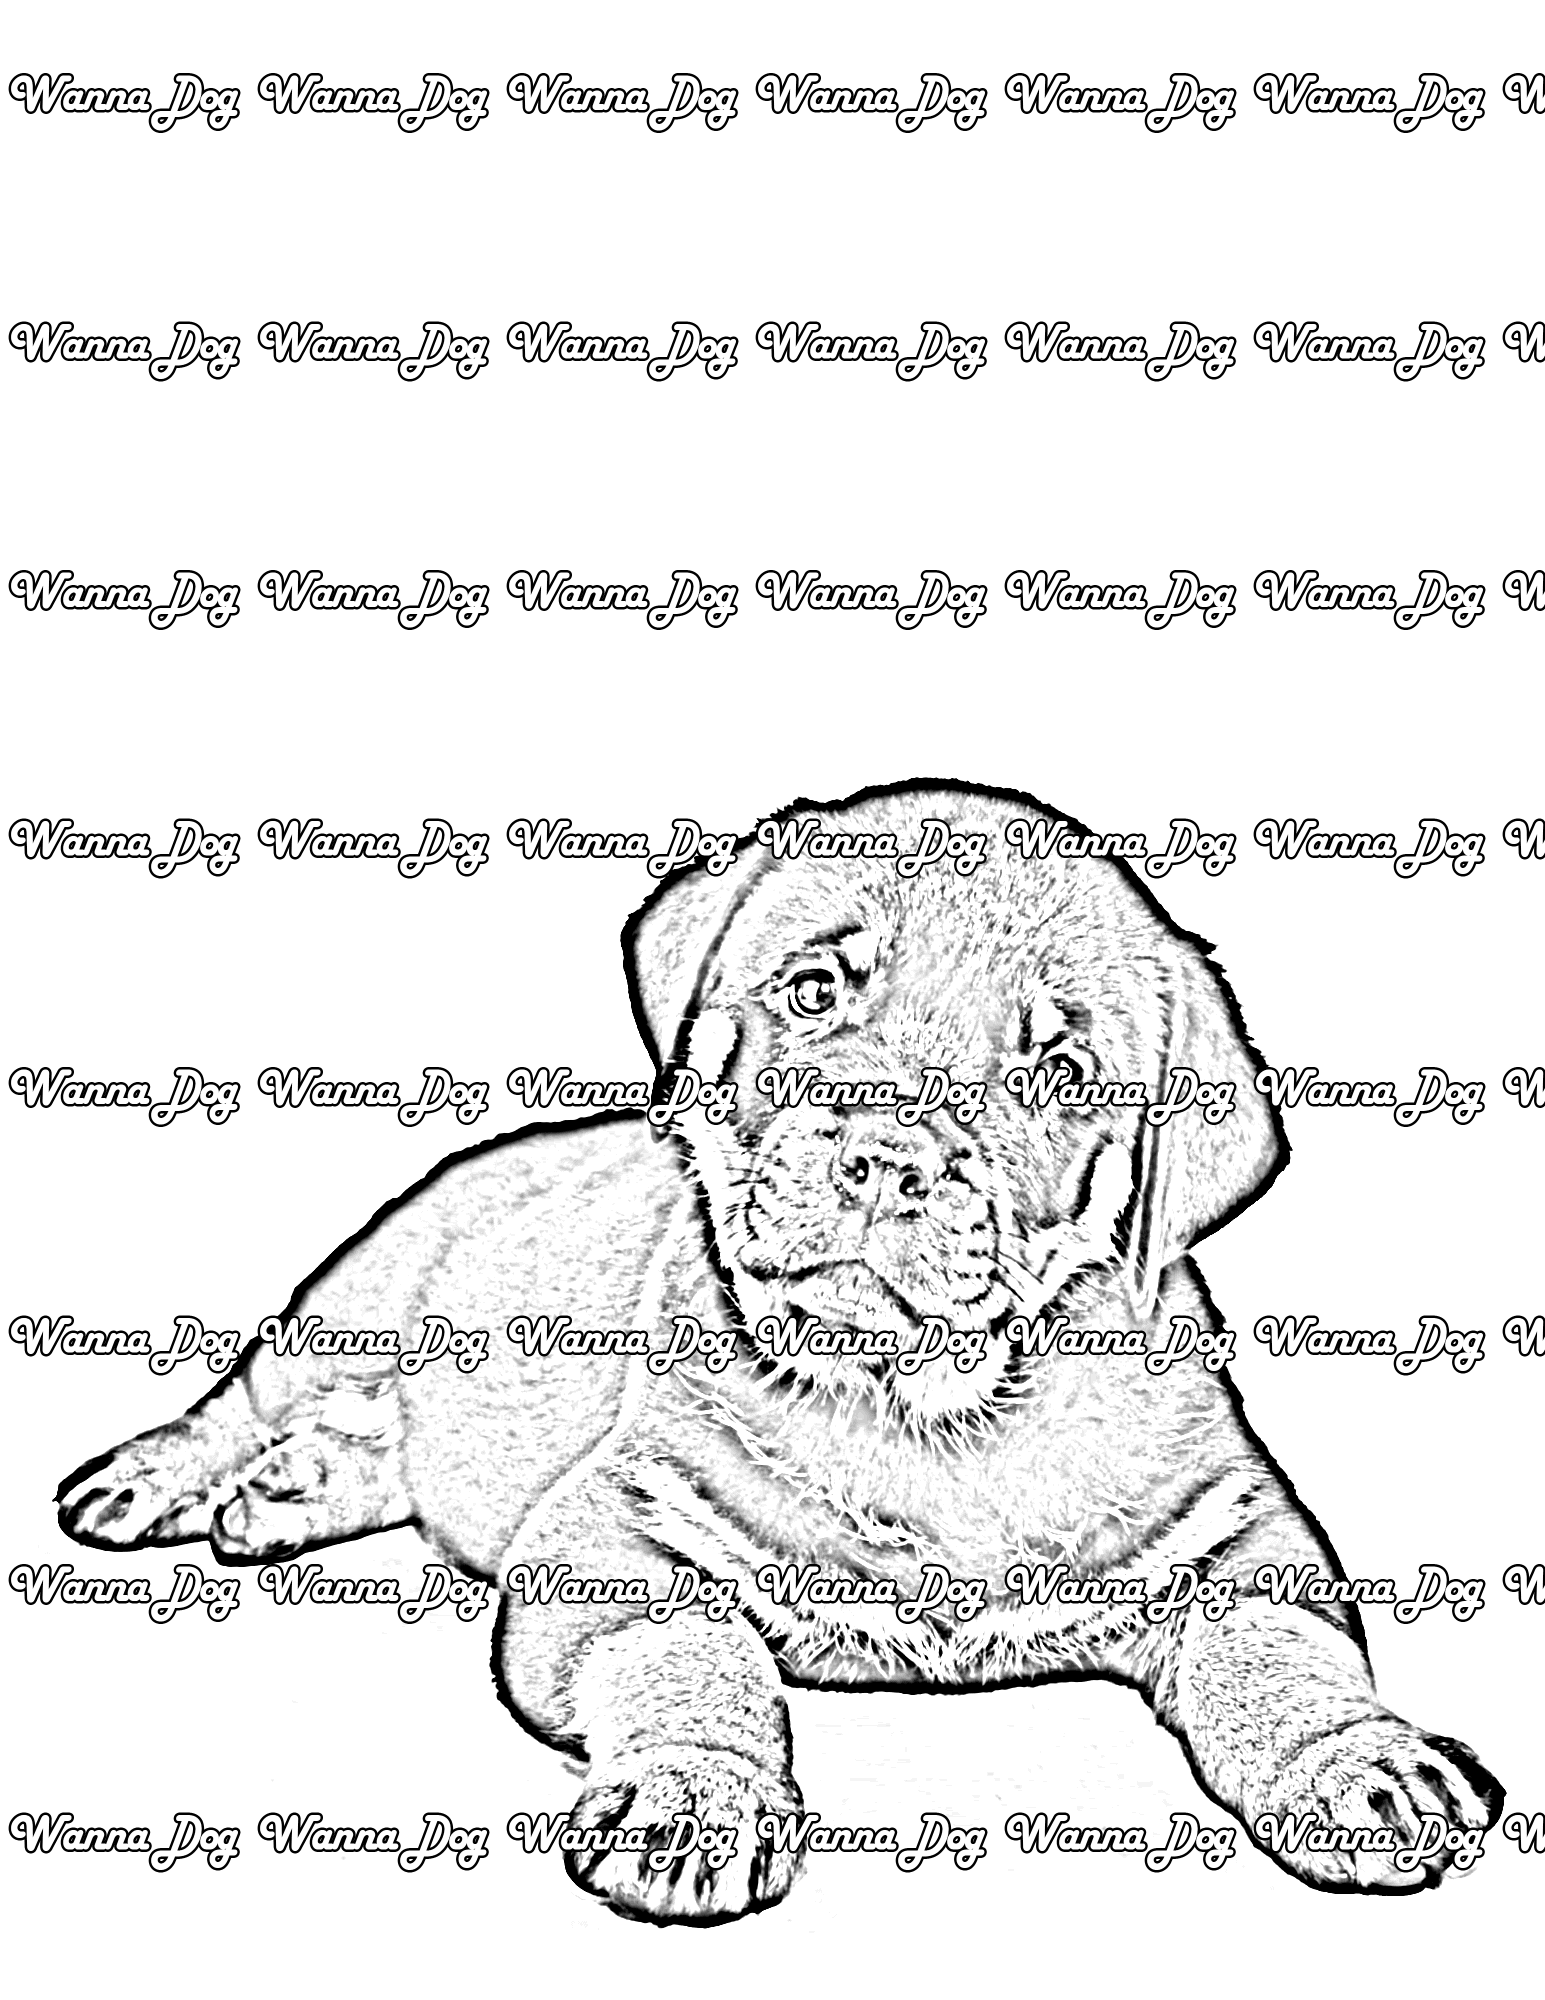 Rottweiler puppy coloring pages â wanna dog